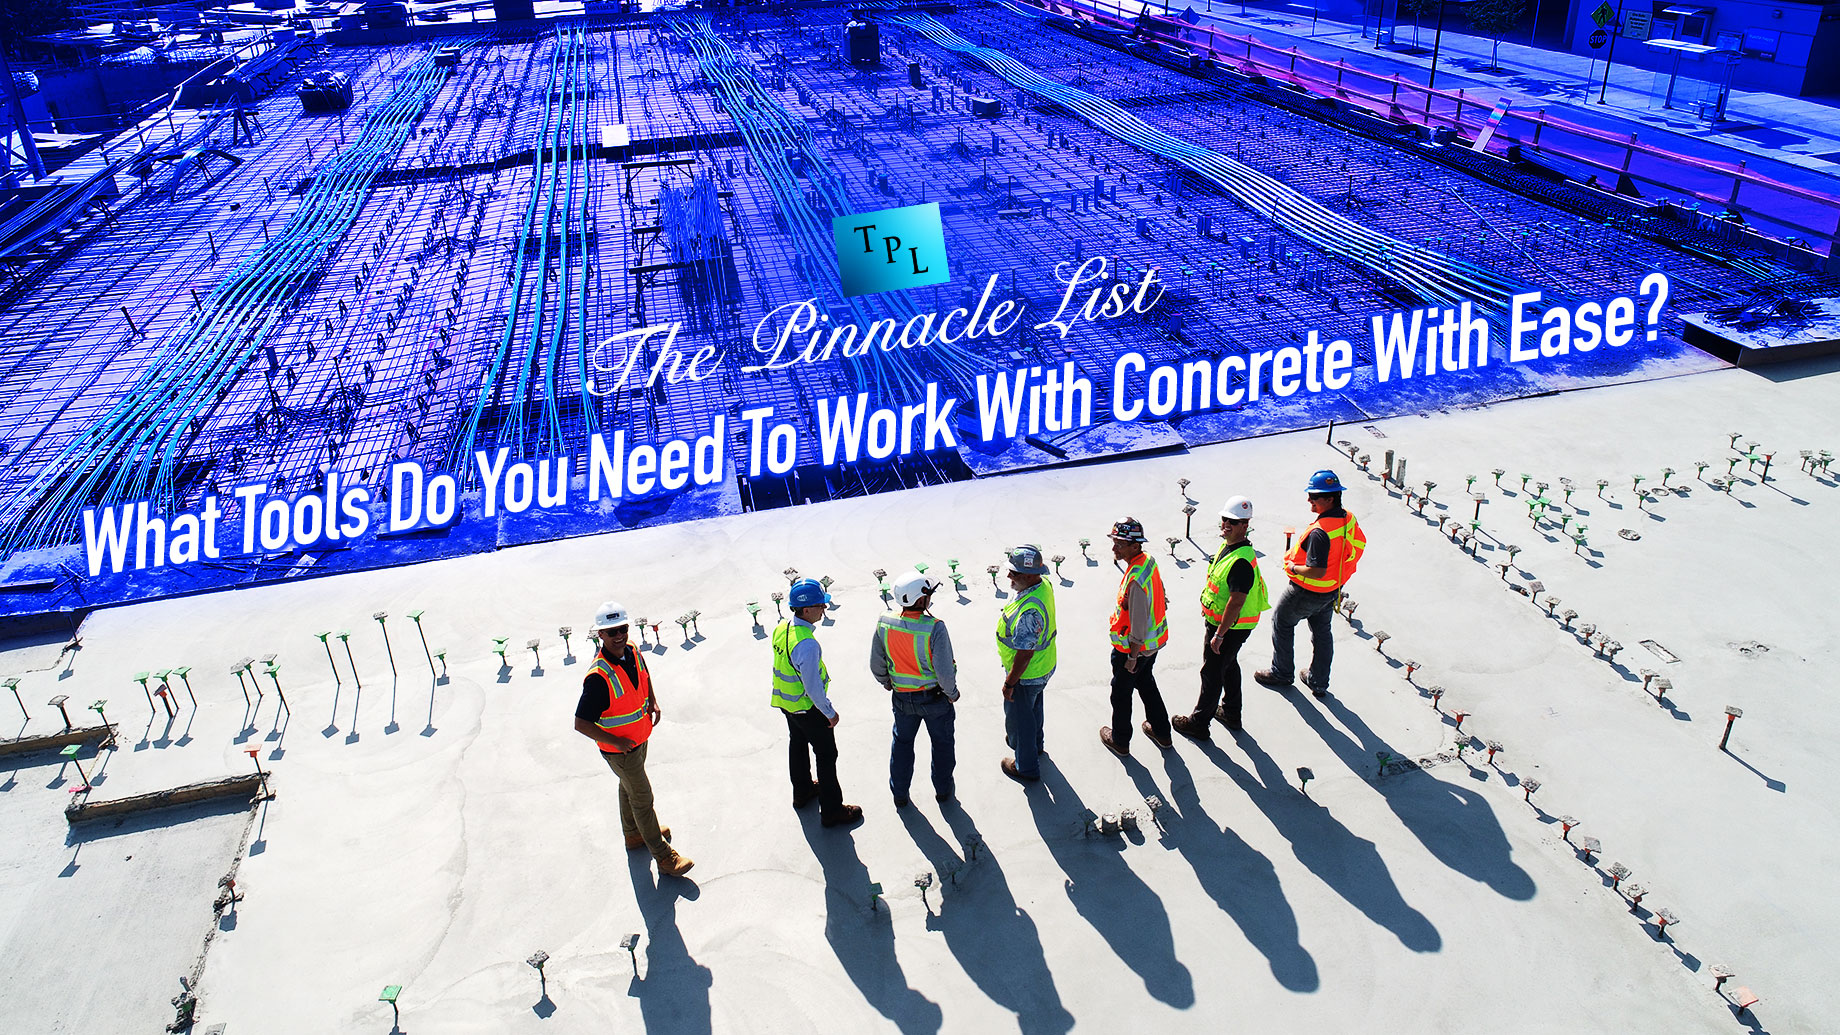 What Tools Do You Need To Work With Concrete With Ease?